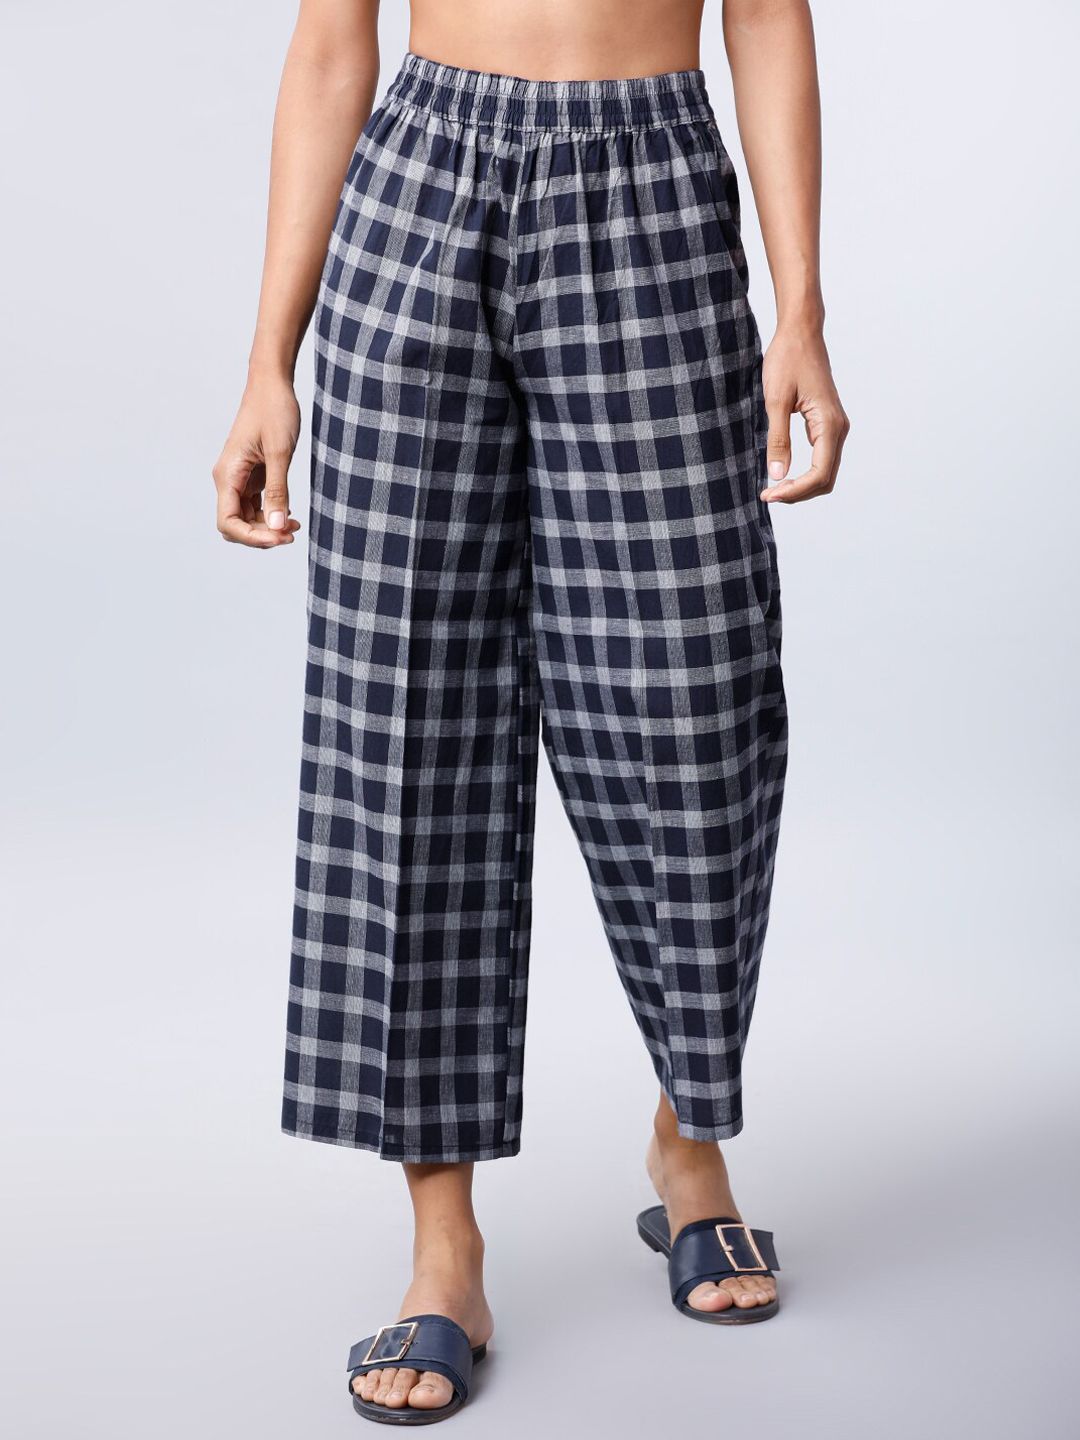 Vishudh Women Navy Blue & Off-White Checked Straight Palazzos Price in India